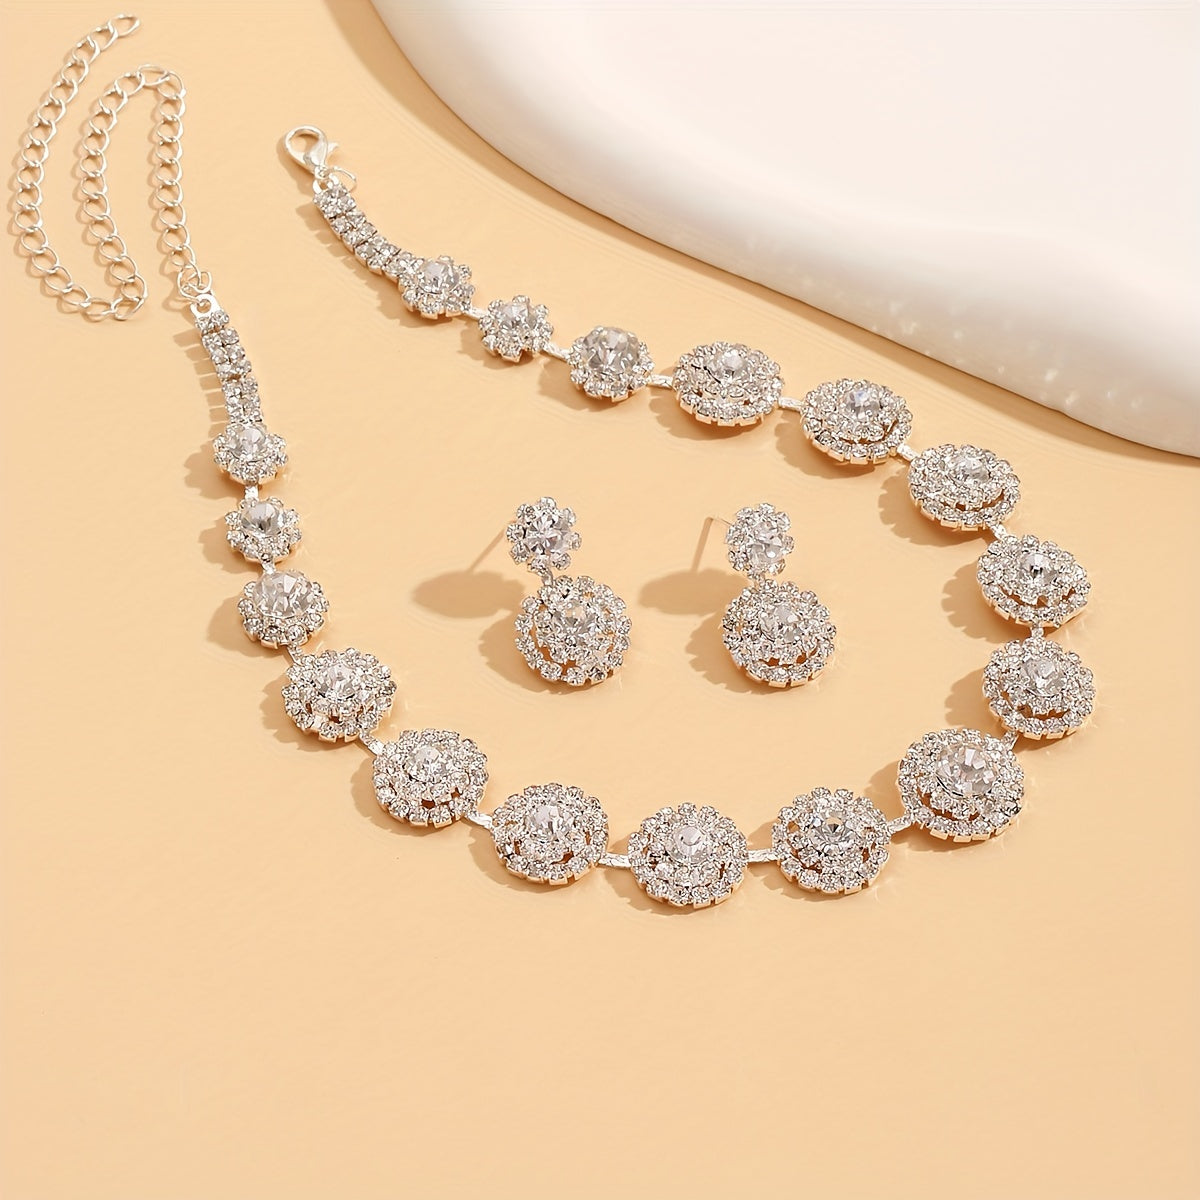 Elegant Vintage Style White Faux Crystal Jewelry Set with Choker Necklace and Dangle Earrings - Perfect for Weddings, Proms, and Special Occasions